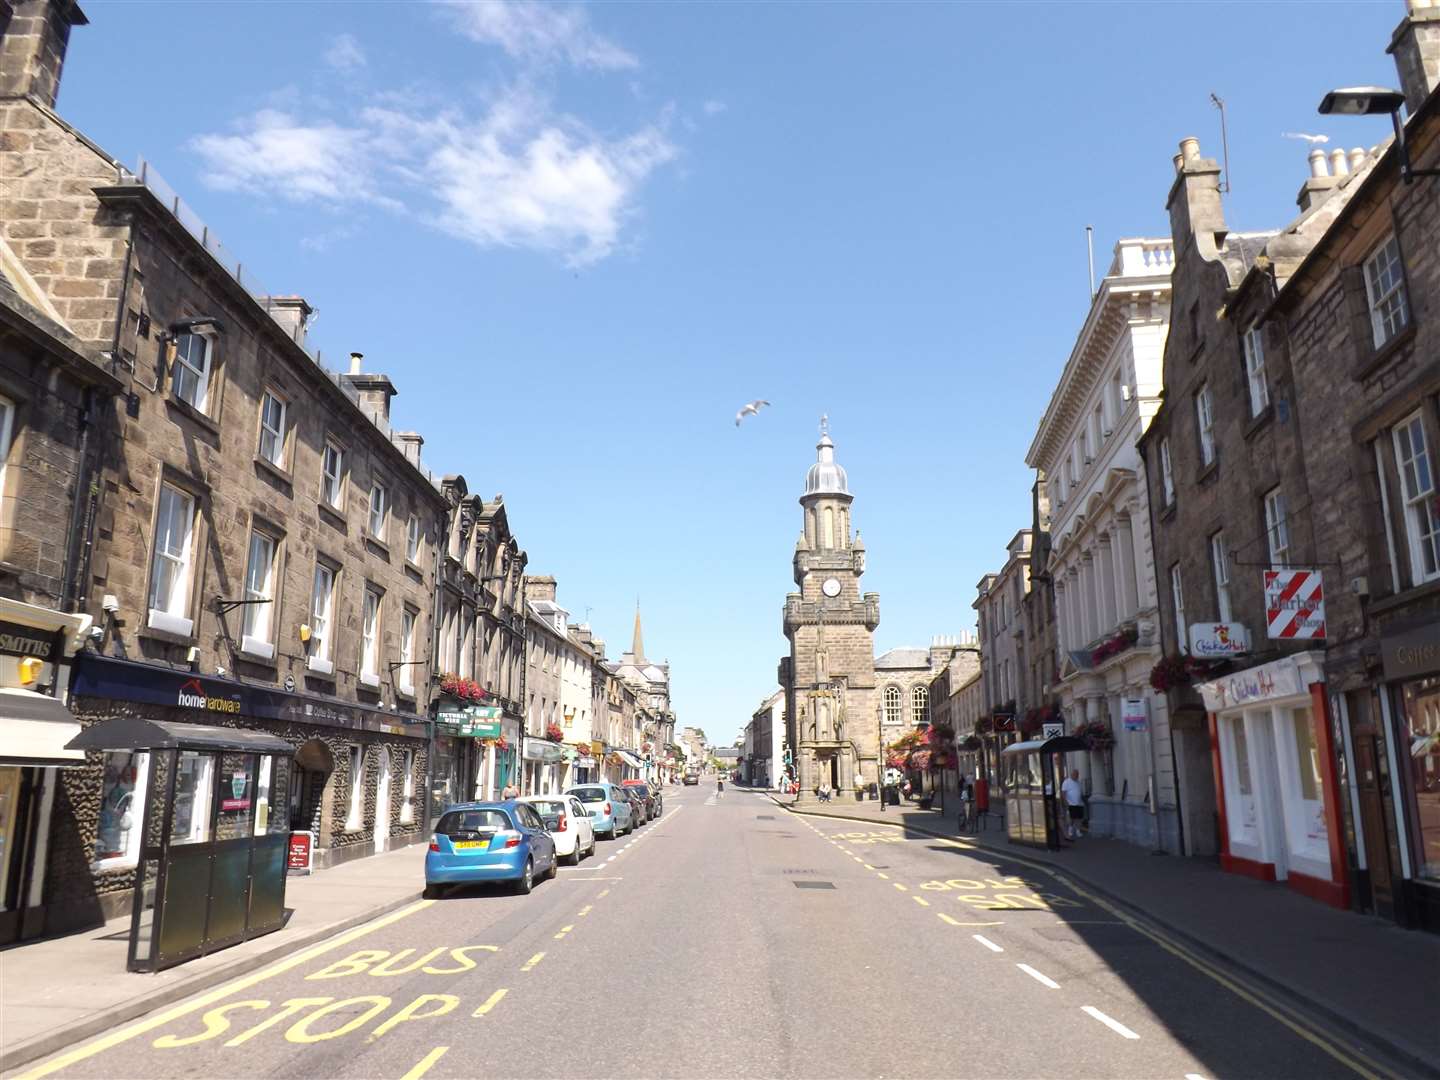 Forres High Street could be in line for redevelopment funding.